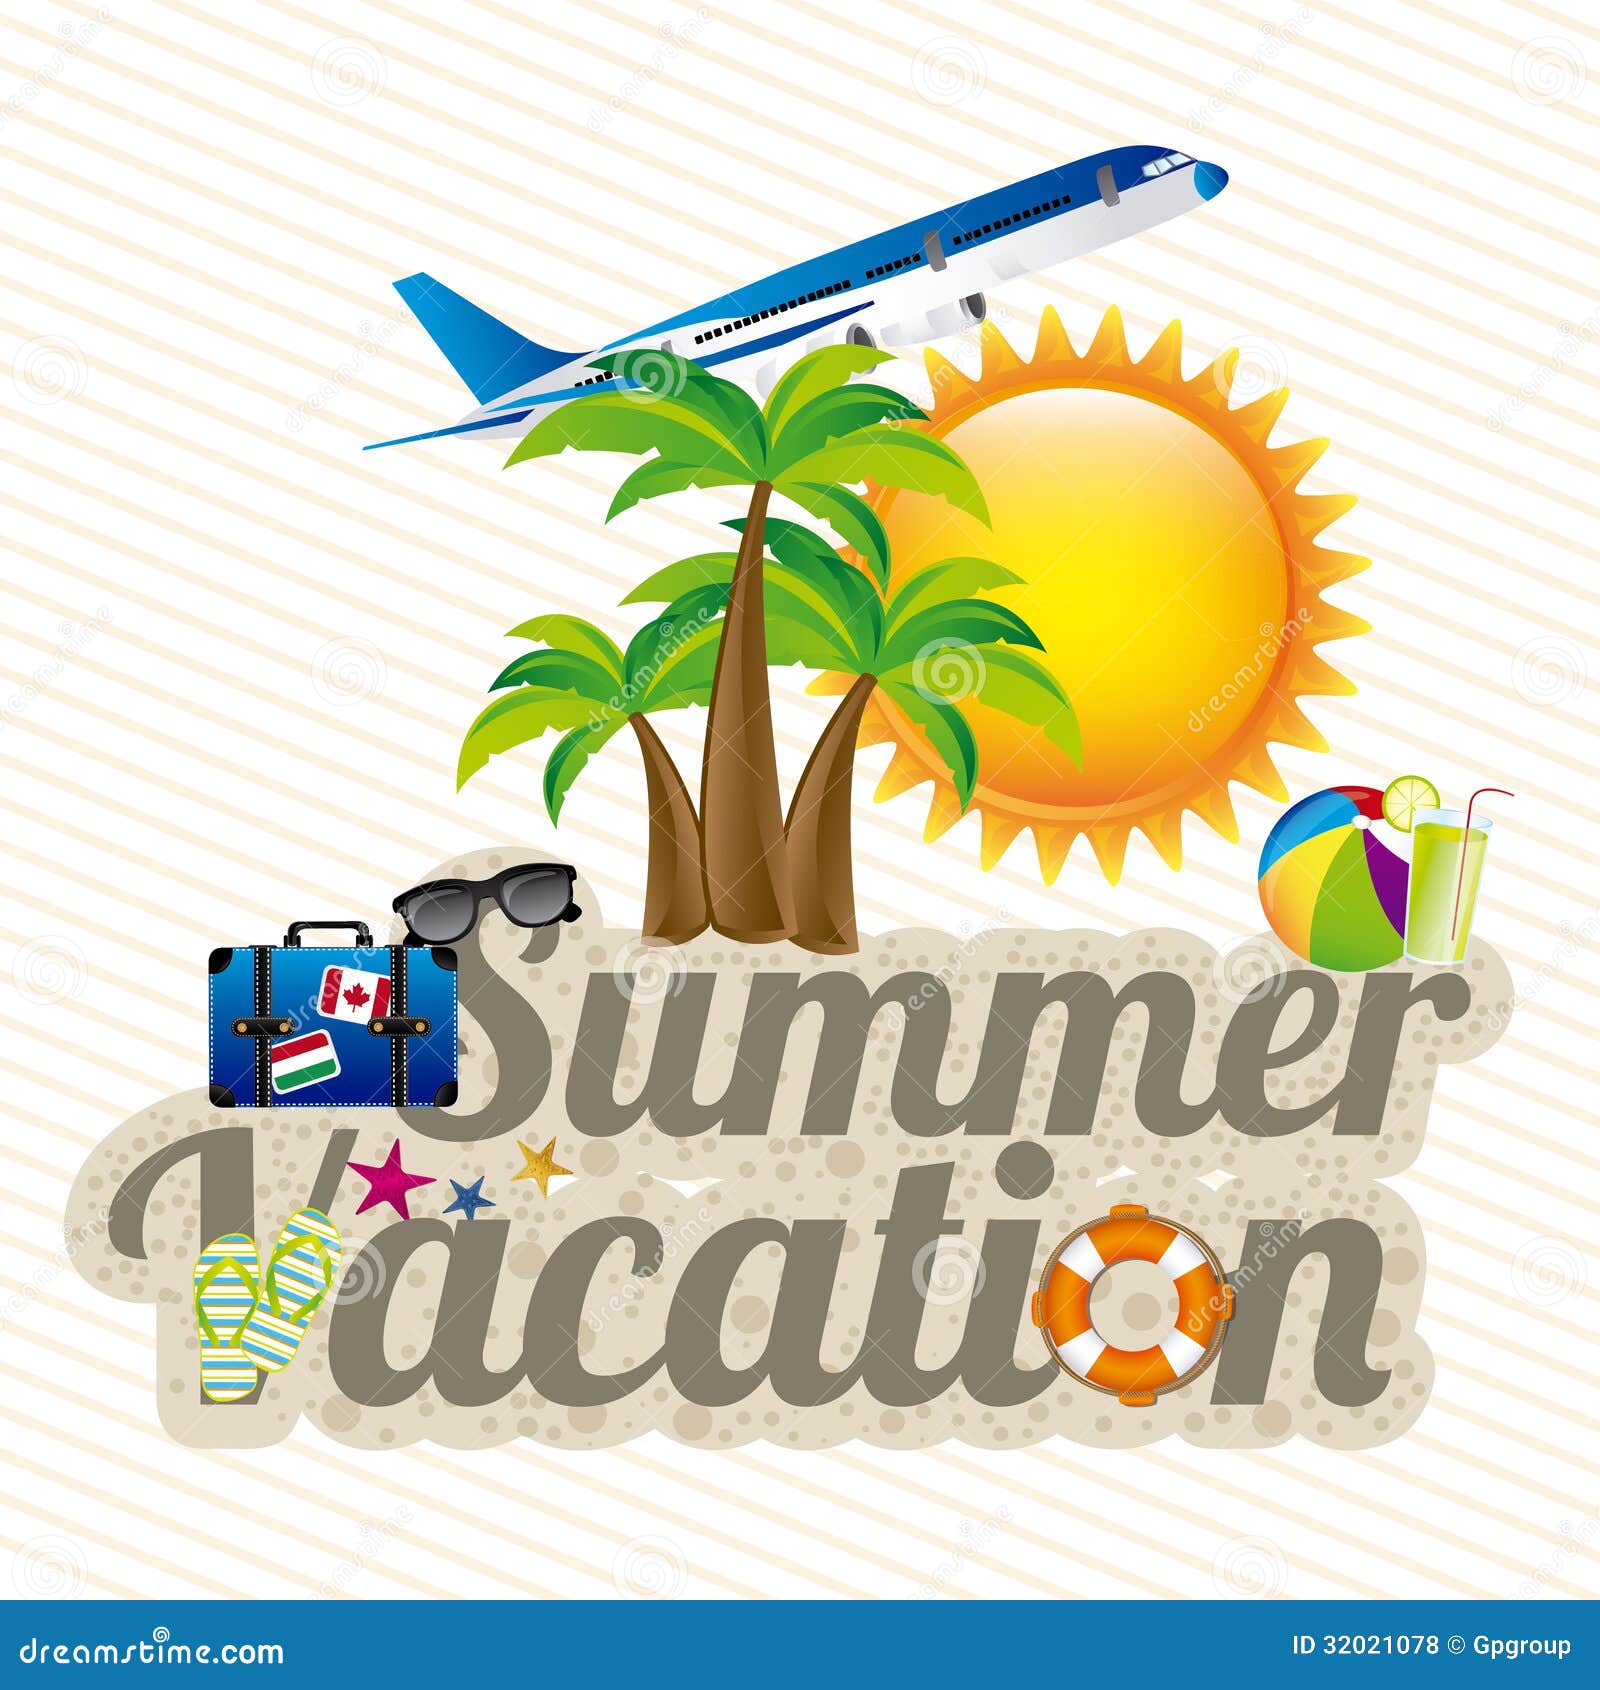 animated clipart summer vacation - photo #42